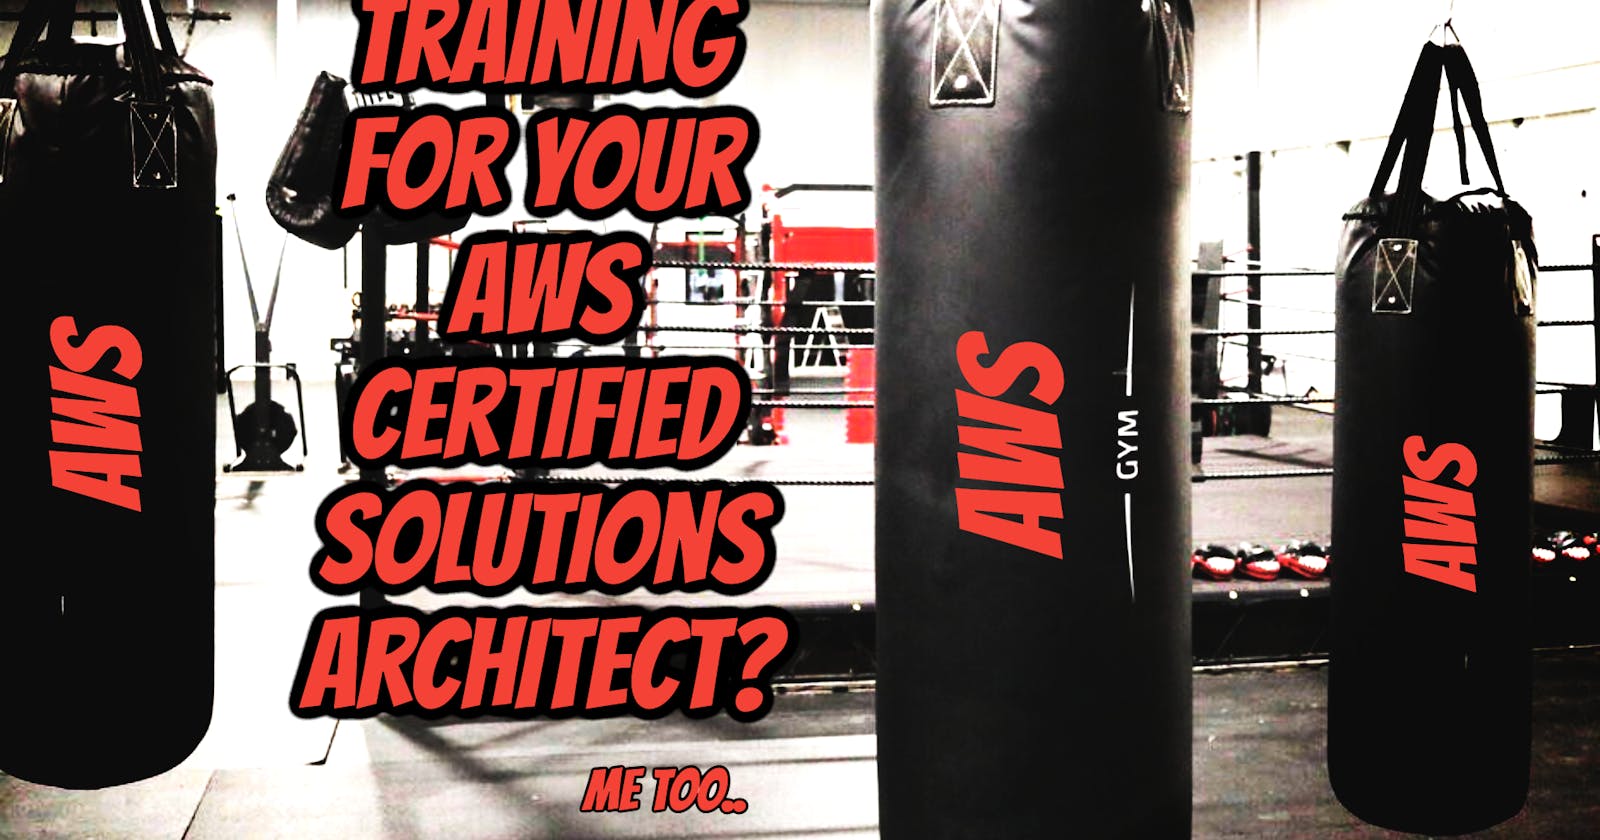 Training for your AWS Certified Solutions Architect?